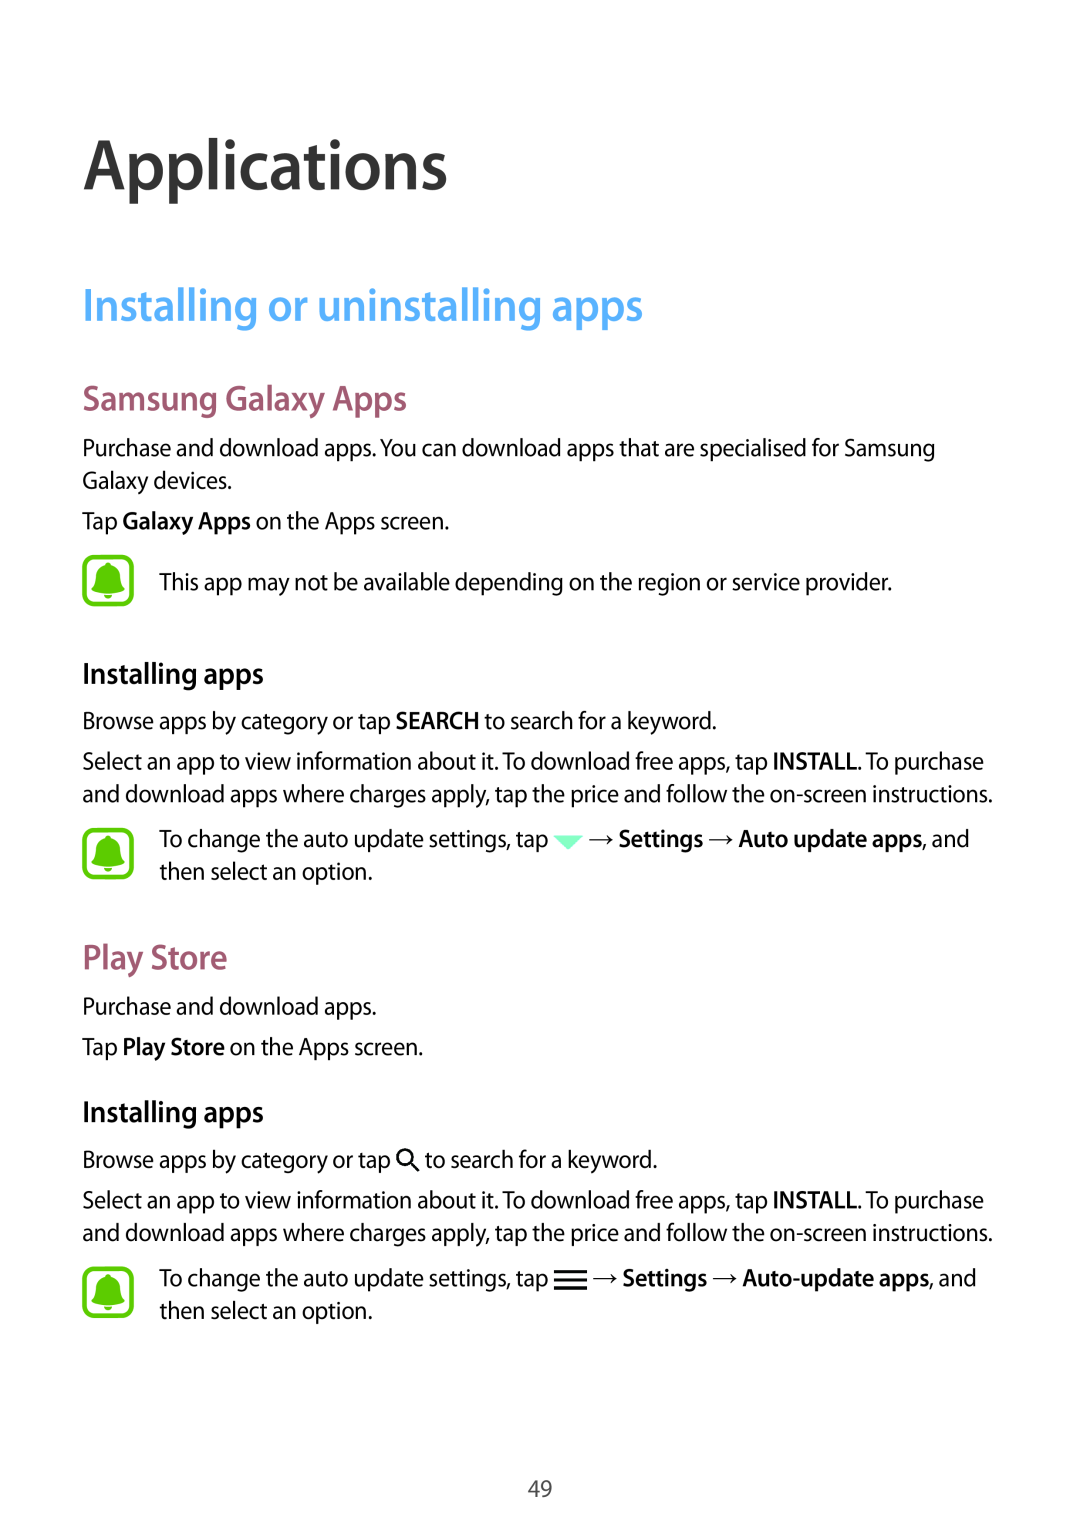 Samsung SM-G920FZKANEE Applications, Installing or uninstalling apps, Samsung Galaxy Apps, Play Store, Installing apps 